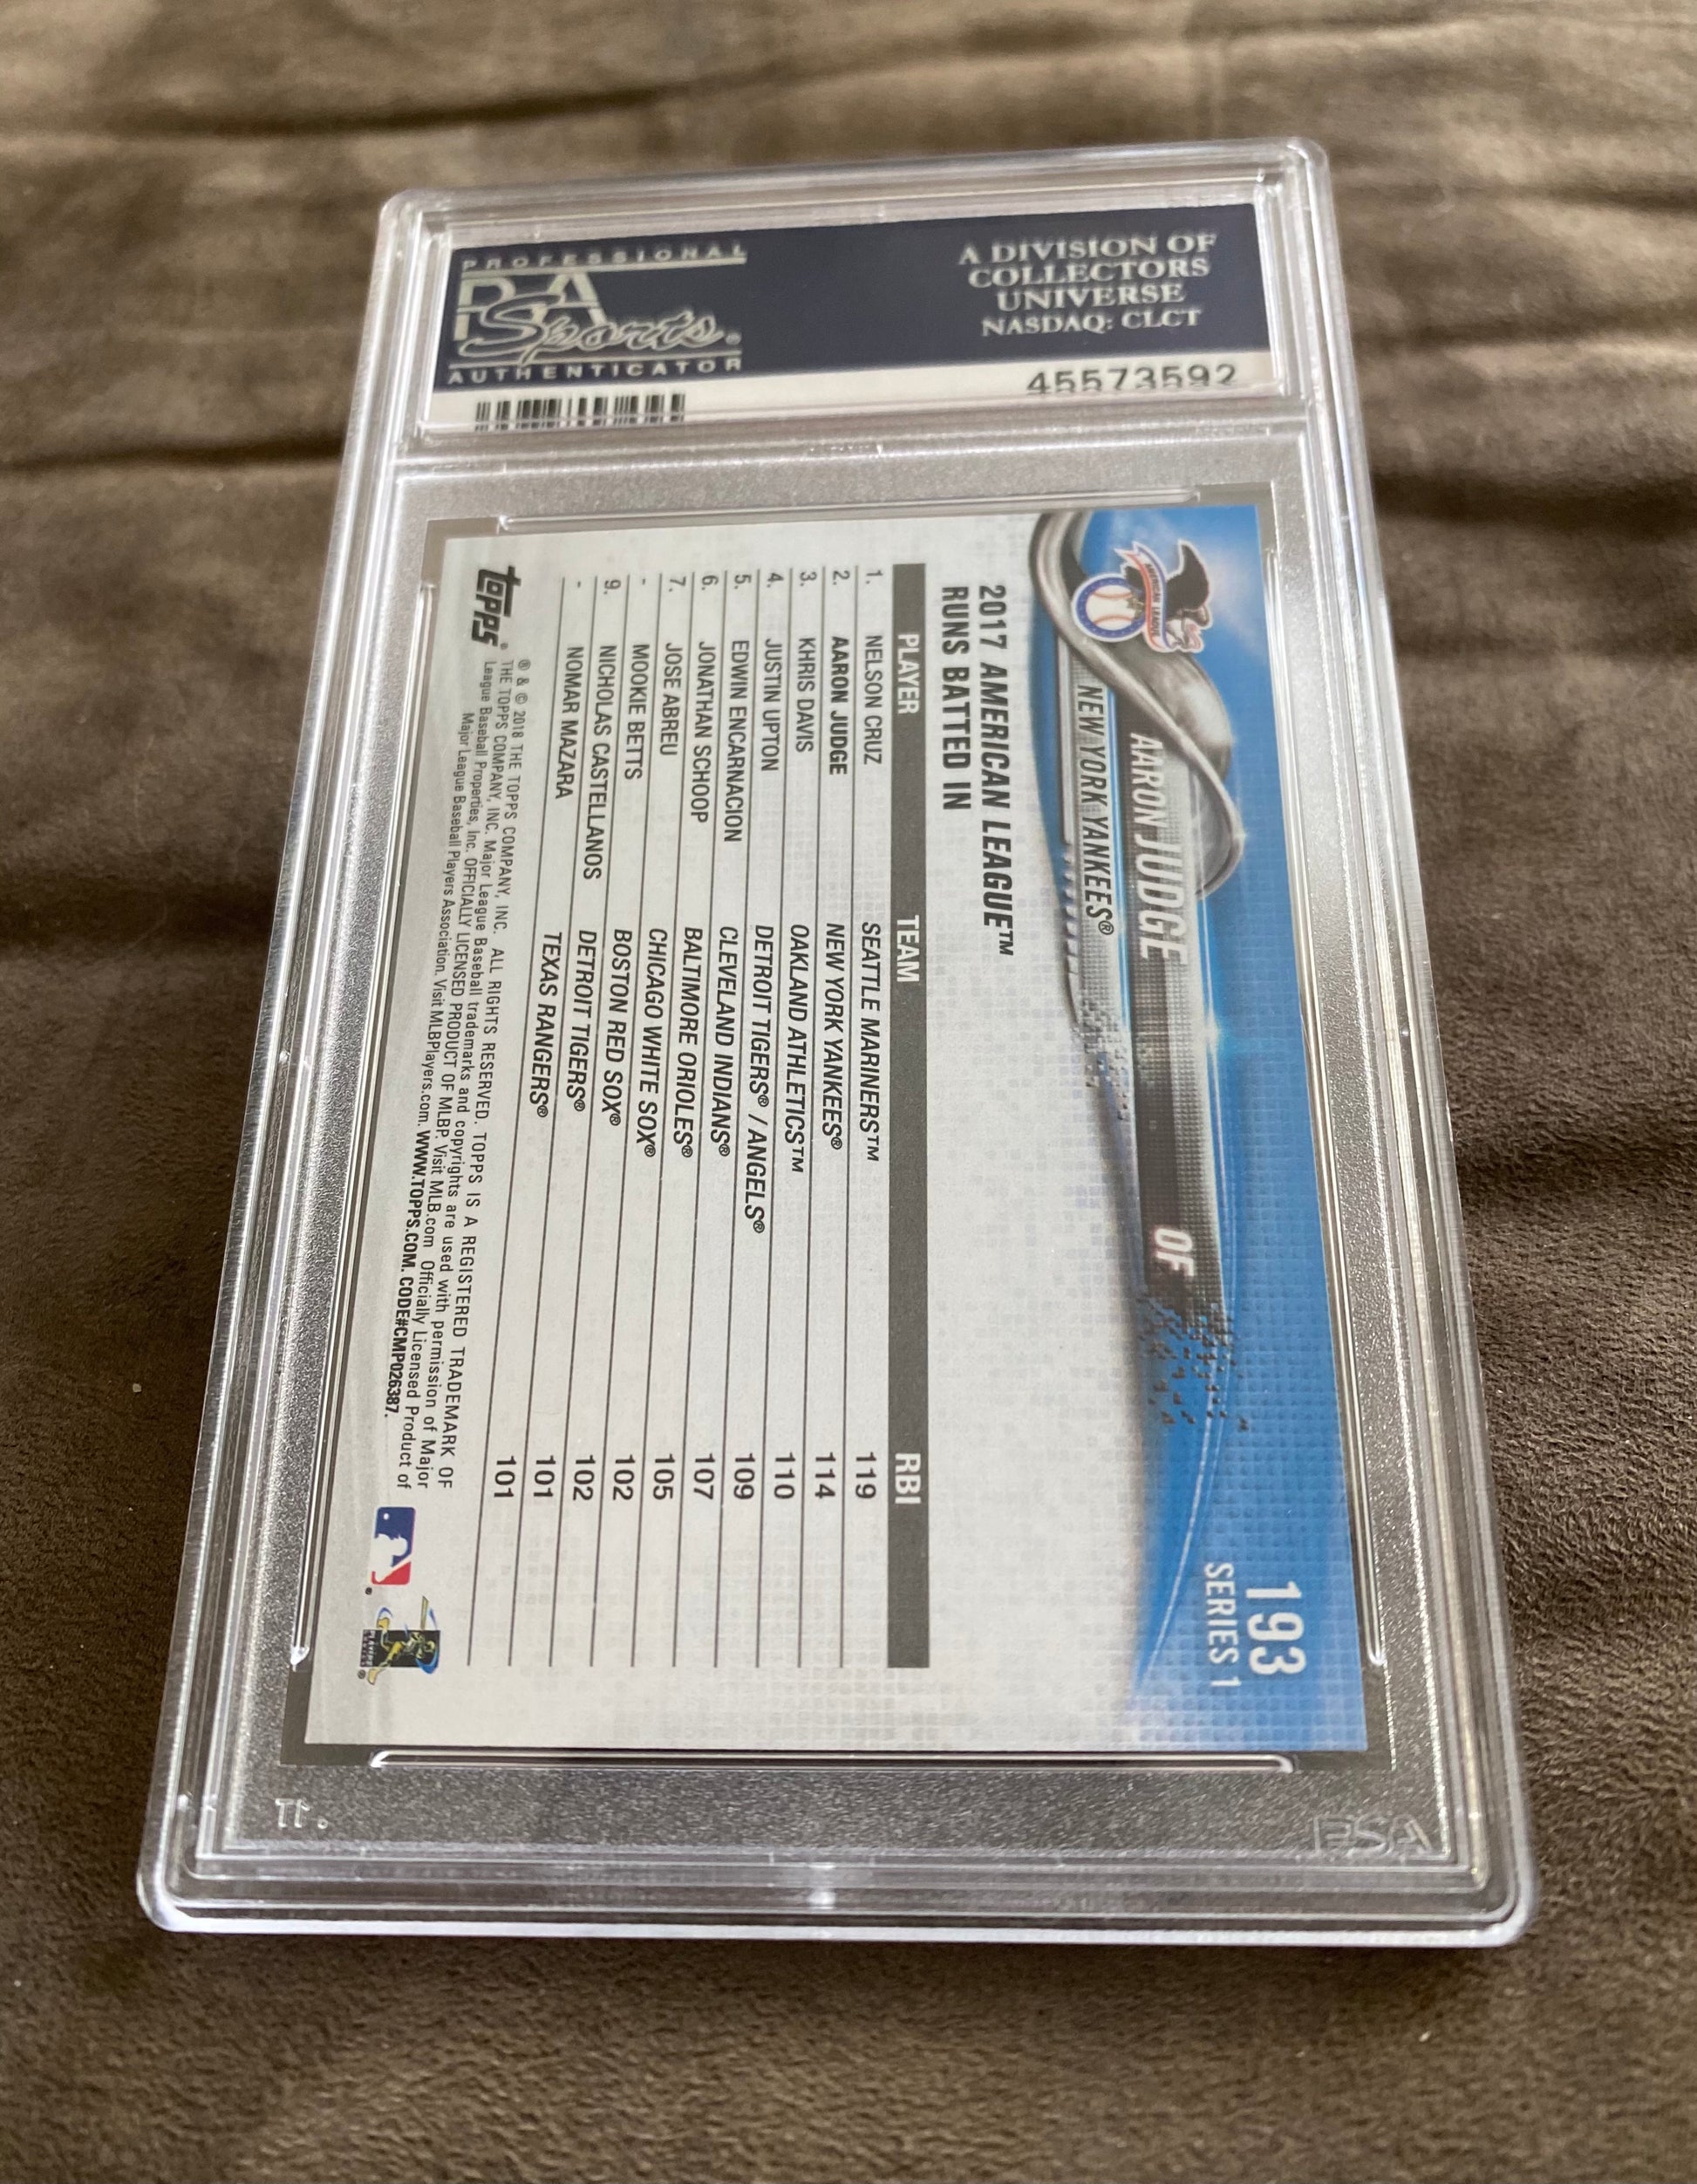 Aaron Judge 2018 Topps (2nd YR) League Leaders PSA 10! – BMC Collectibles